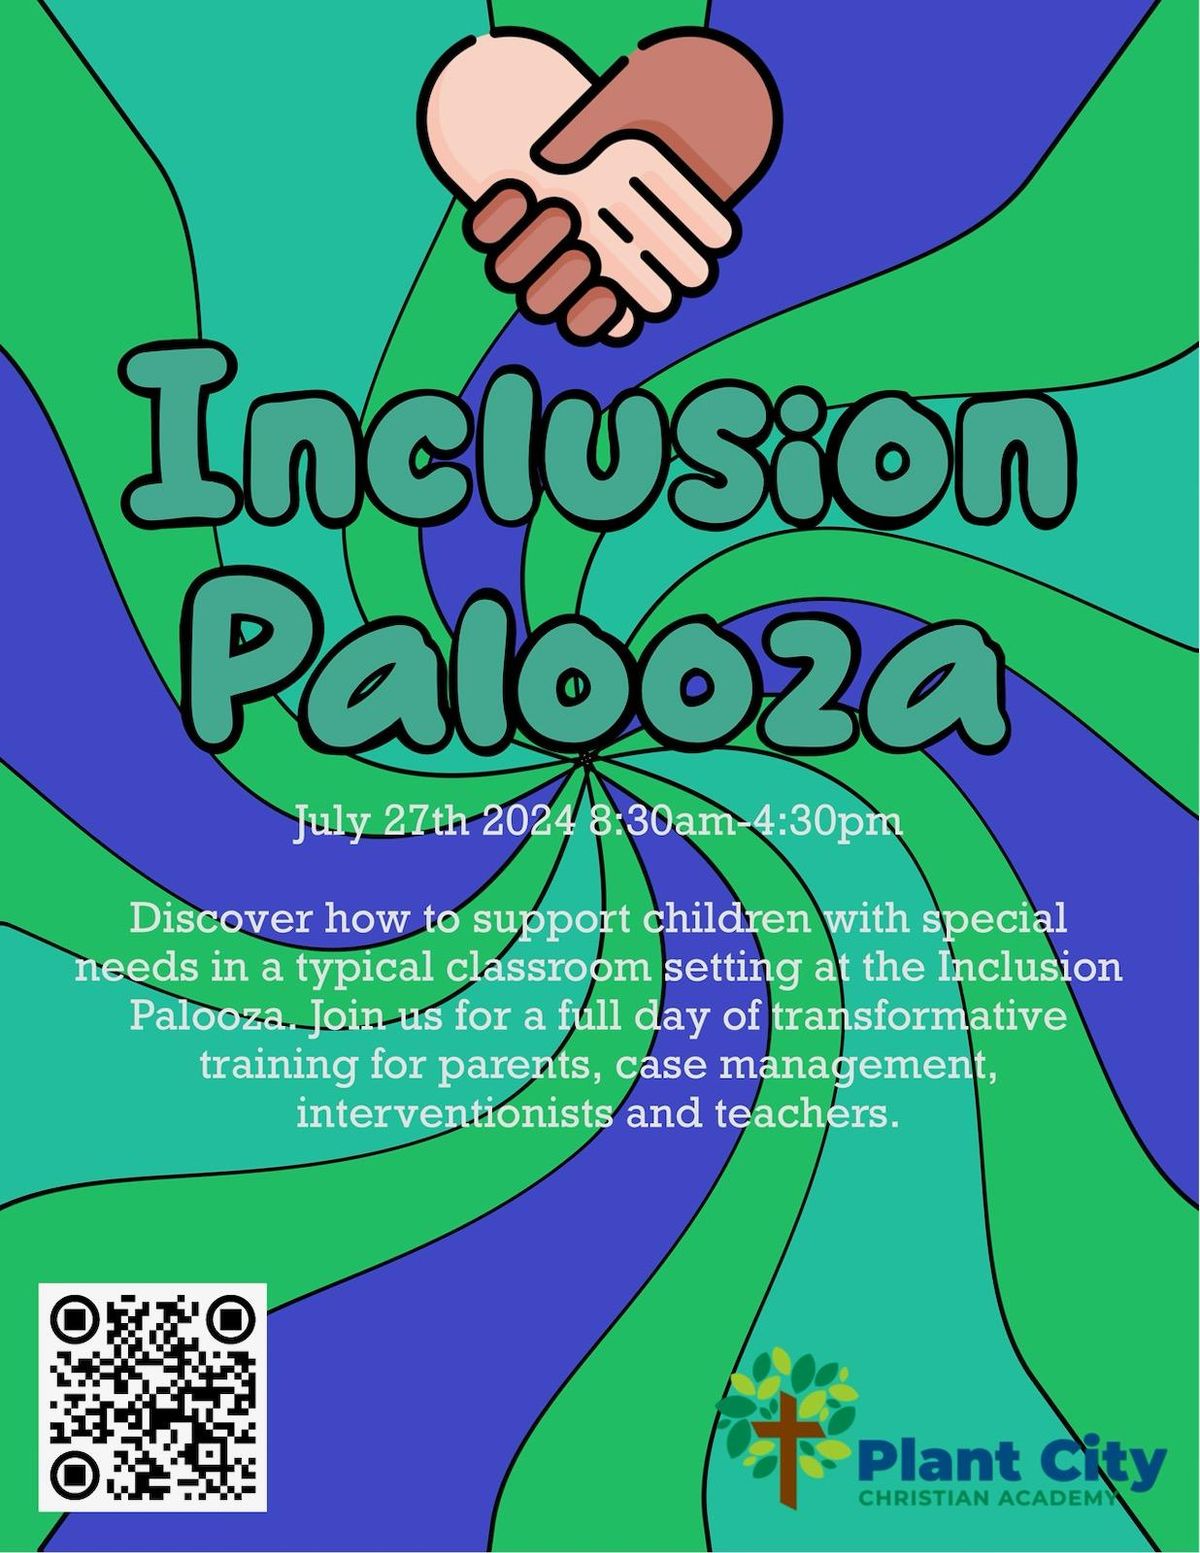 Inclusion Palooza by Quees Associates